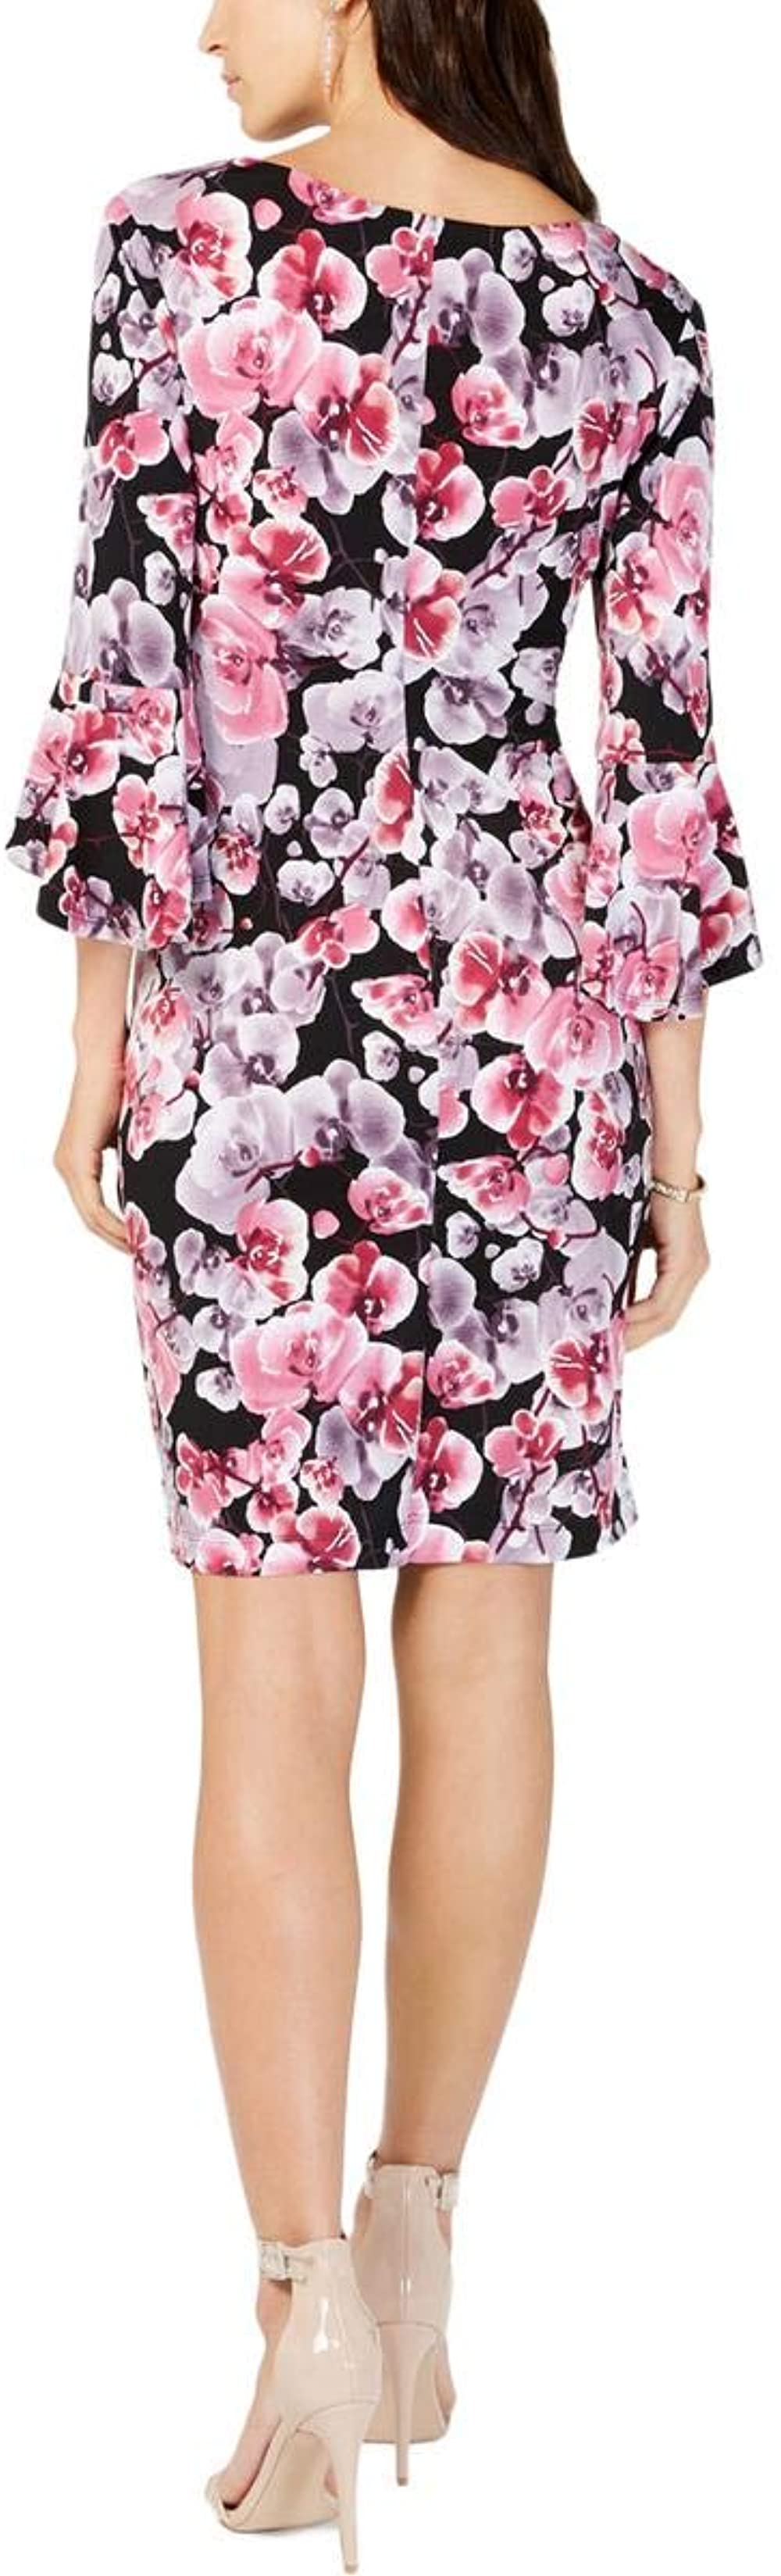 Connected Apparel Womens Floral Print A Line Dress